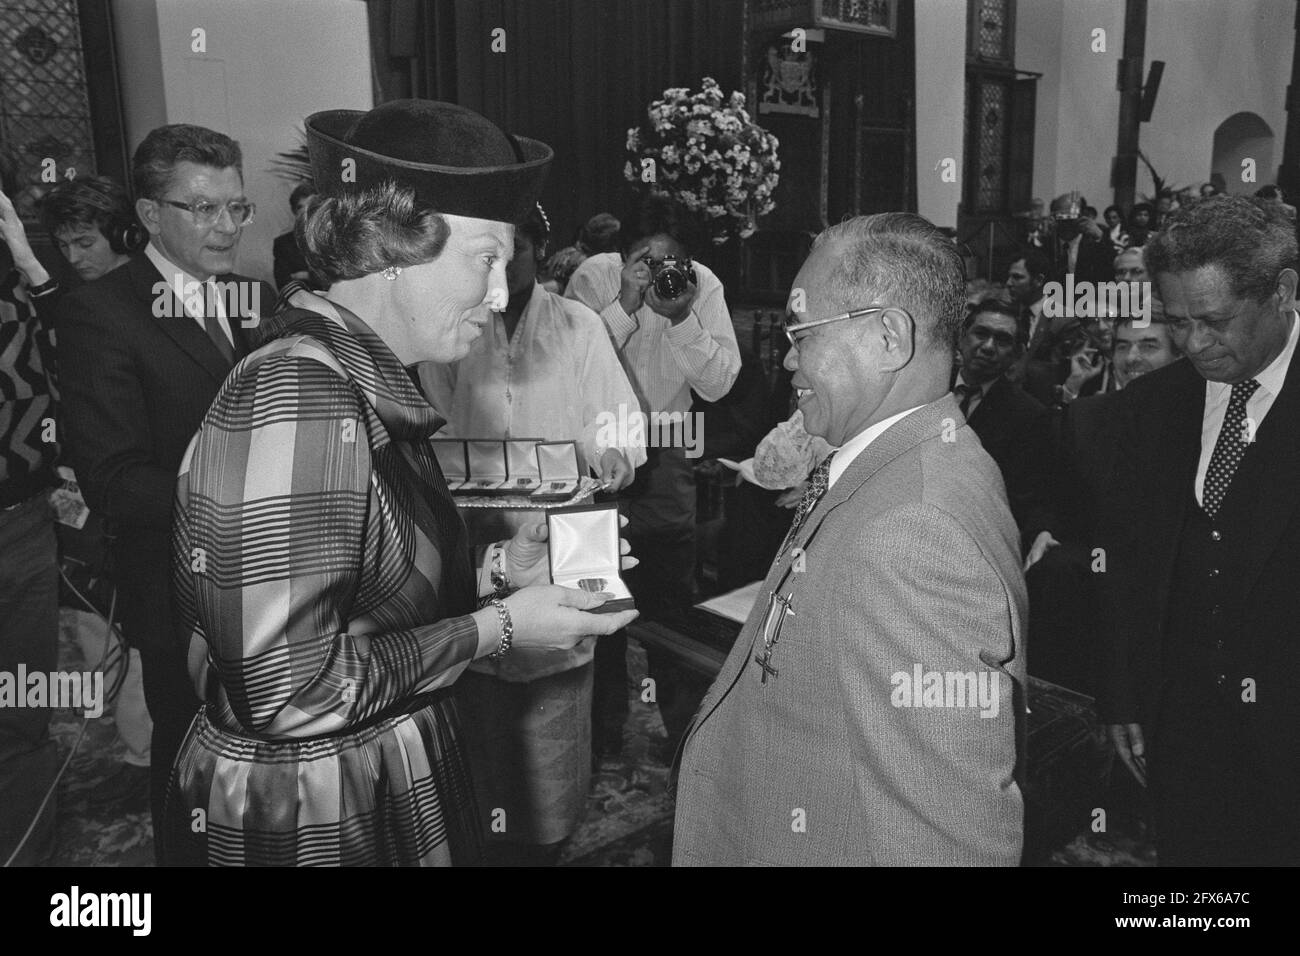 Commemorative meeting on the occasion of 35-year presence of the Moluccans in the Netherlands; Queen Beatrix presents commemorative medals, November 25, 1986, meetings, commemorations, presentations, medals, The Netherlands, 20th century press agency photo, news to remember, documentary, historic photography 1945-1990, visual stories, human history of the Twentieth Century, capturing moments in time Stock Photo